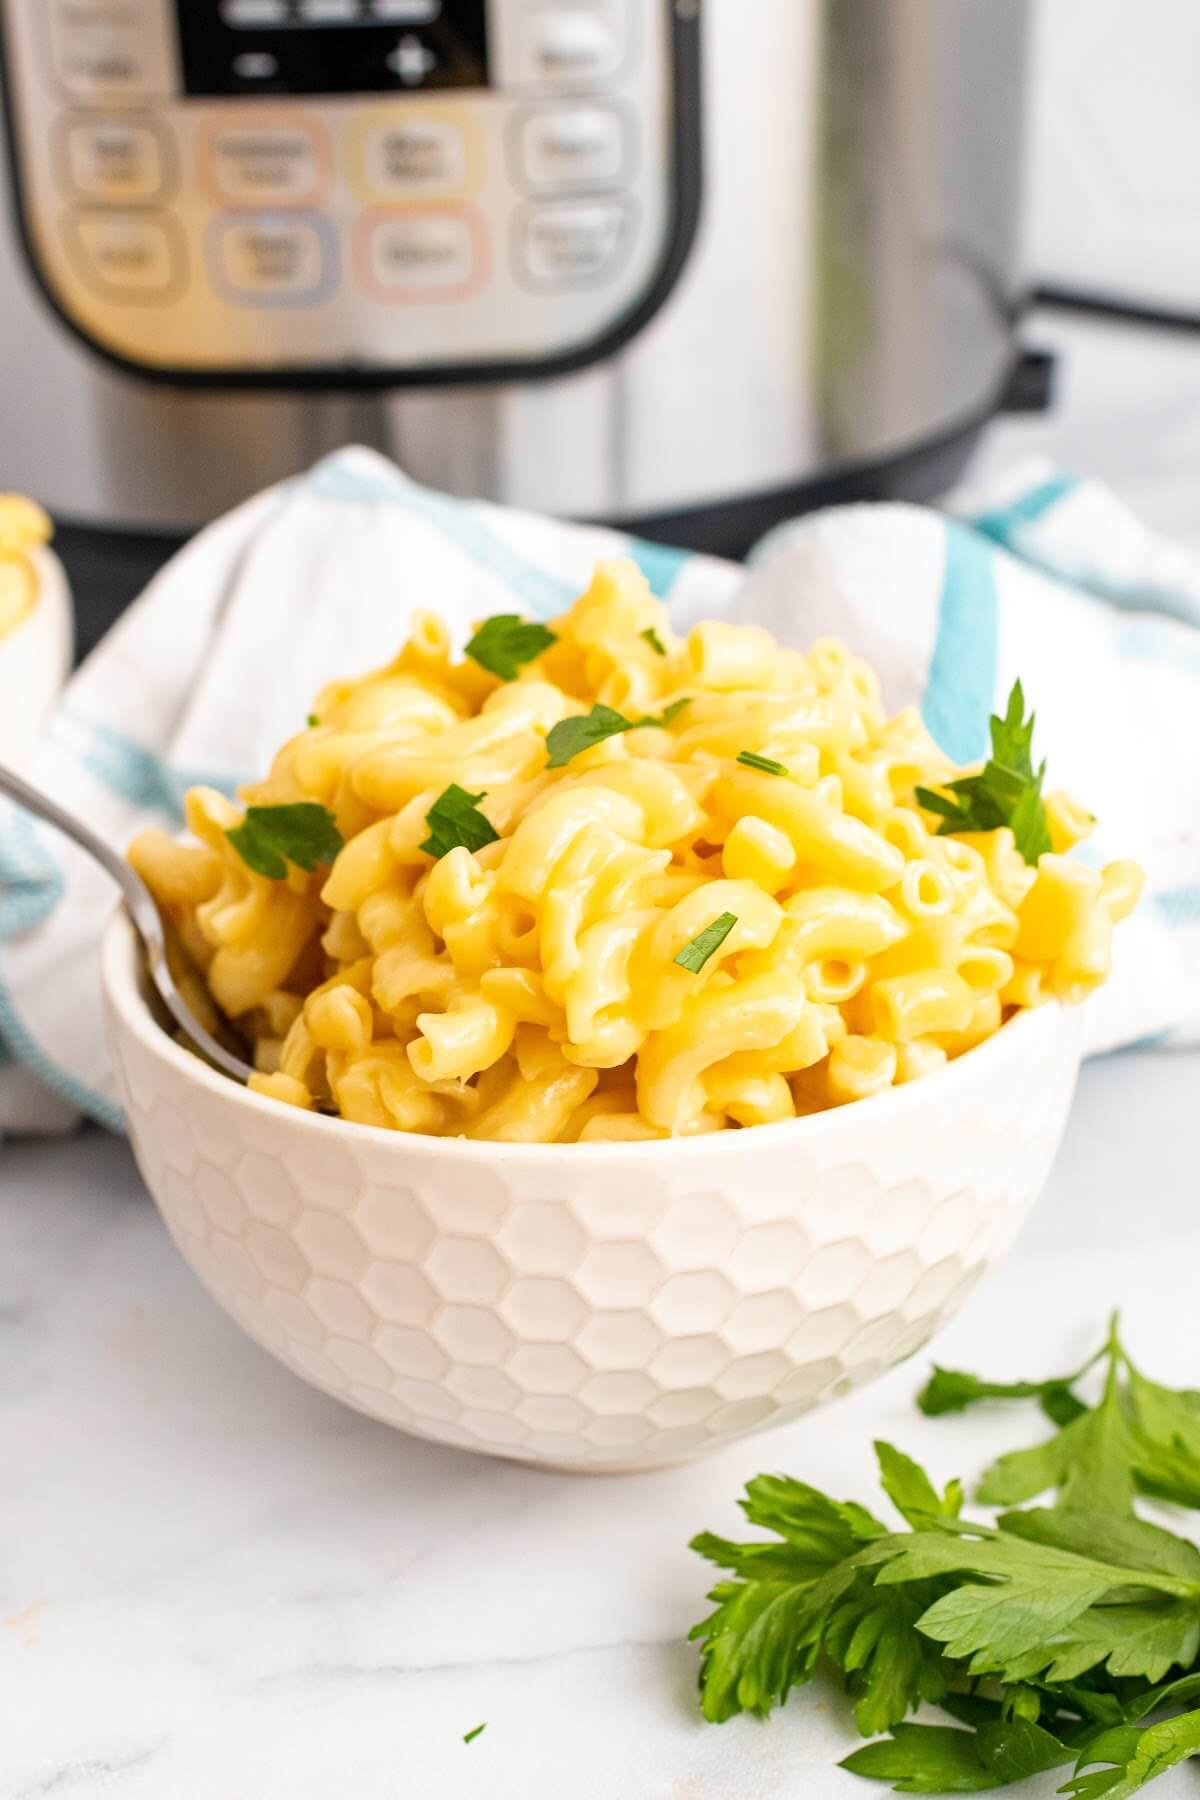 One bowl full of homemade Mac and cheese with a fork in it, garnished with fresh parsley sitting next to fresh Italian parsley sprigs, a cloth kitchen towel and an Instant Pot.